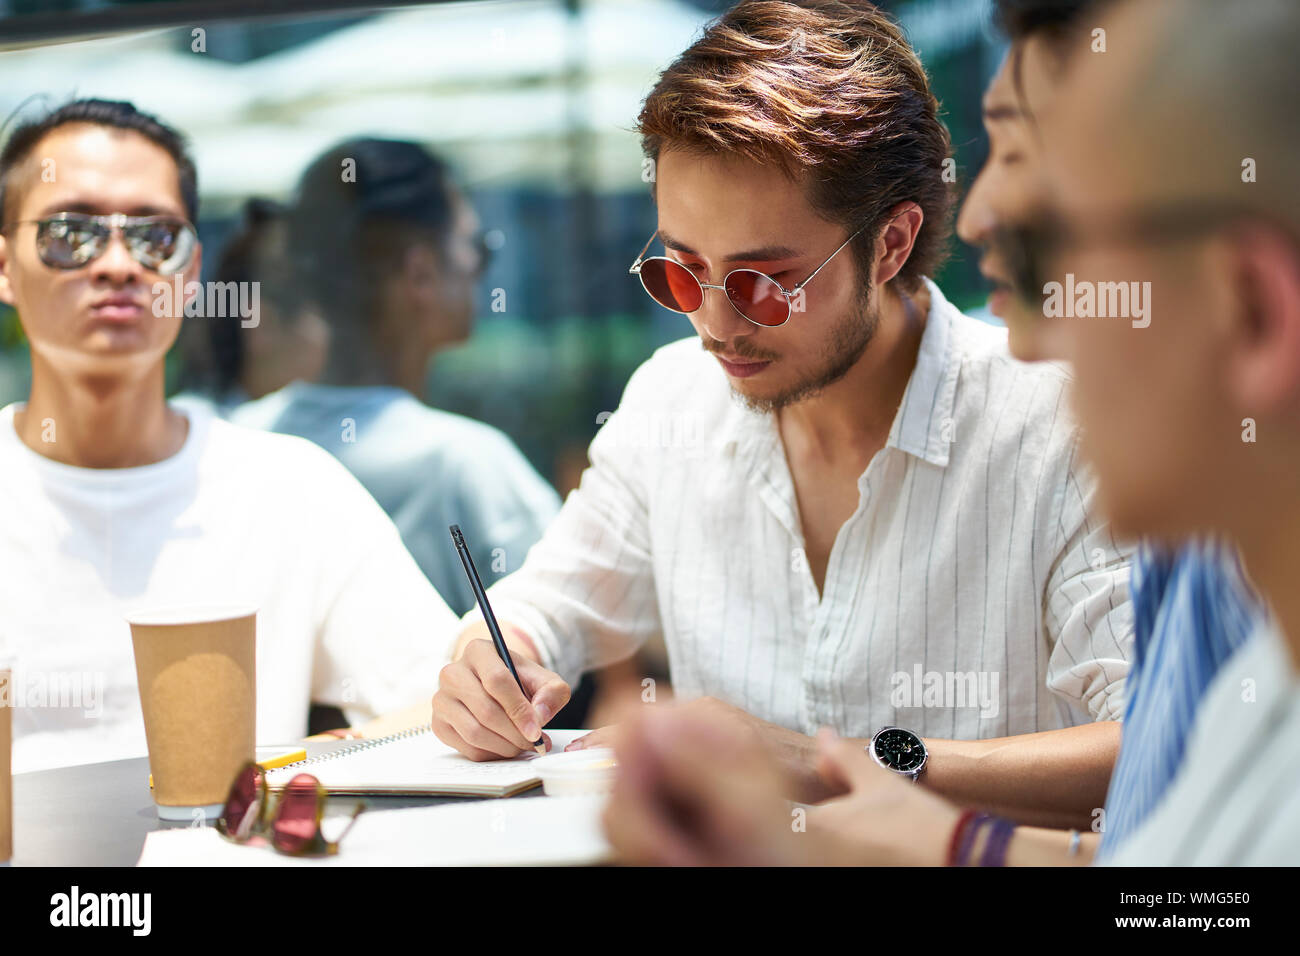 group of young asian university students studying together in an outdoor coffee shop Stock Photo